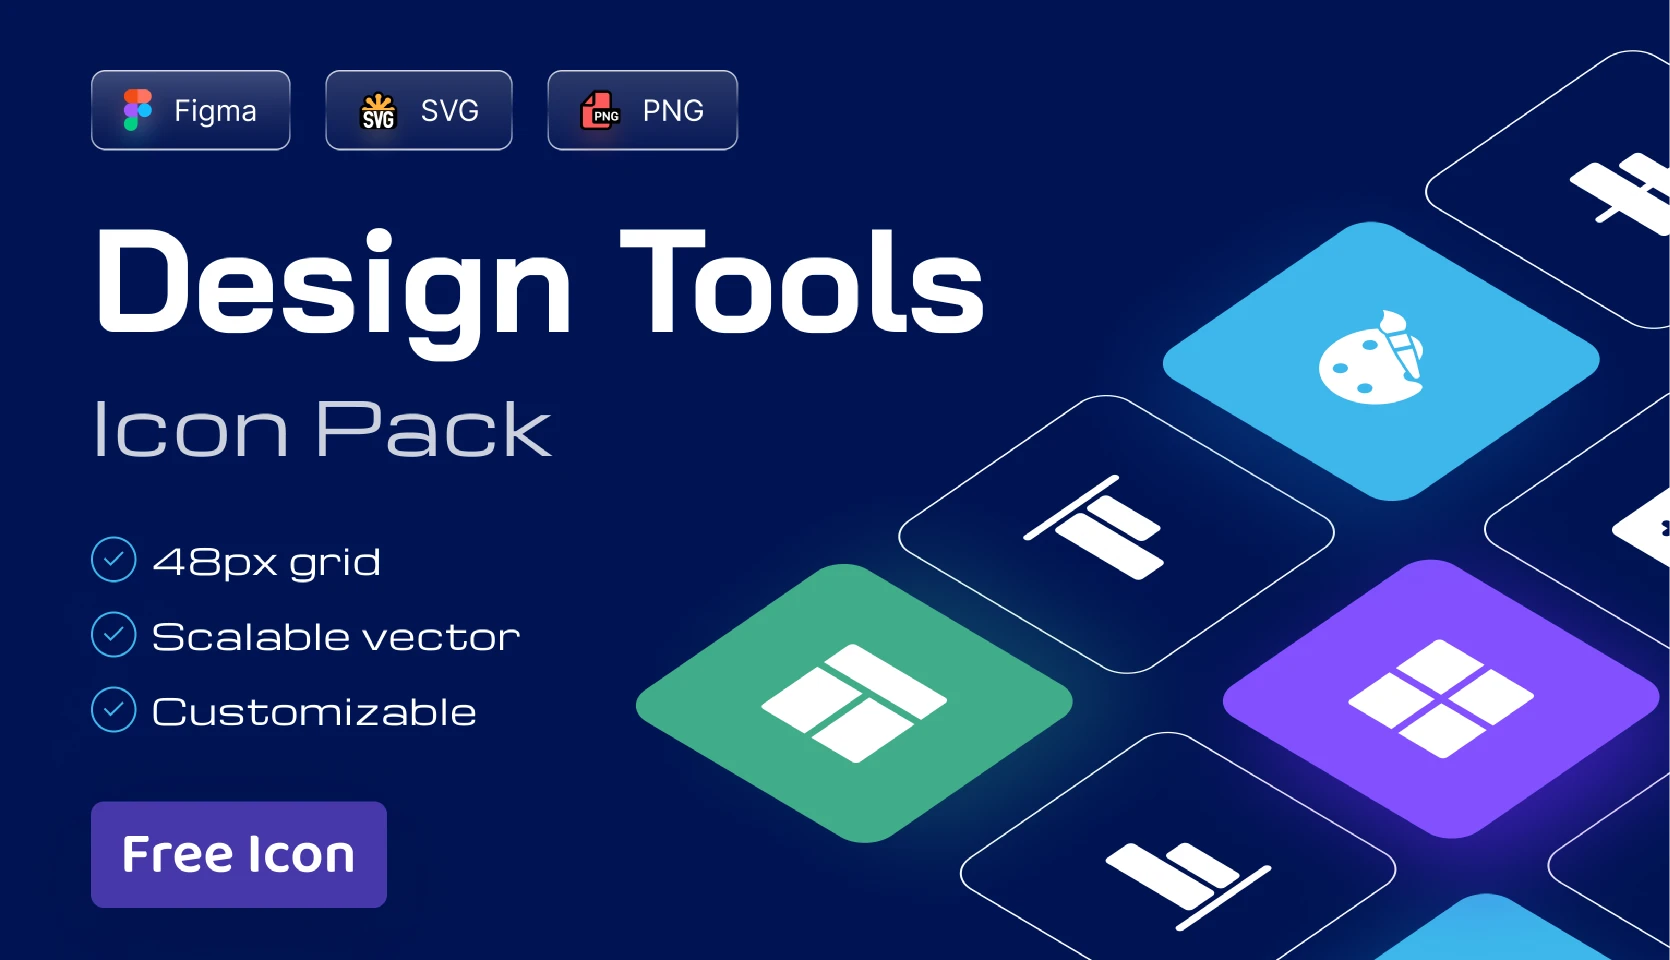 Design Tools Icon Pack for Figma and Adobe XD